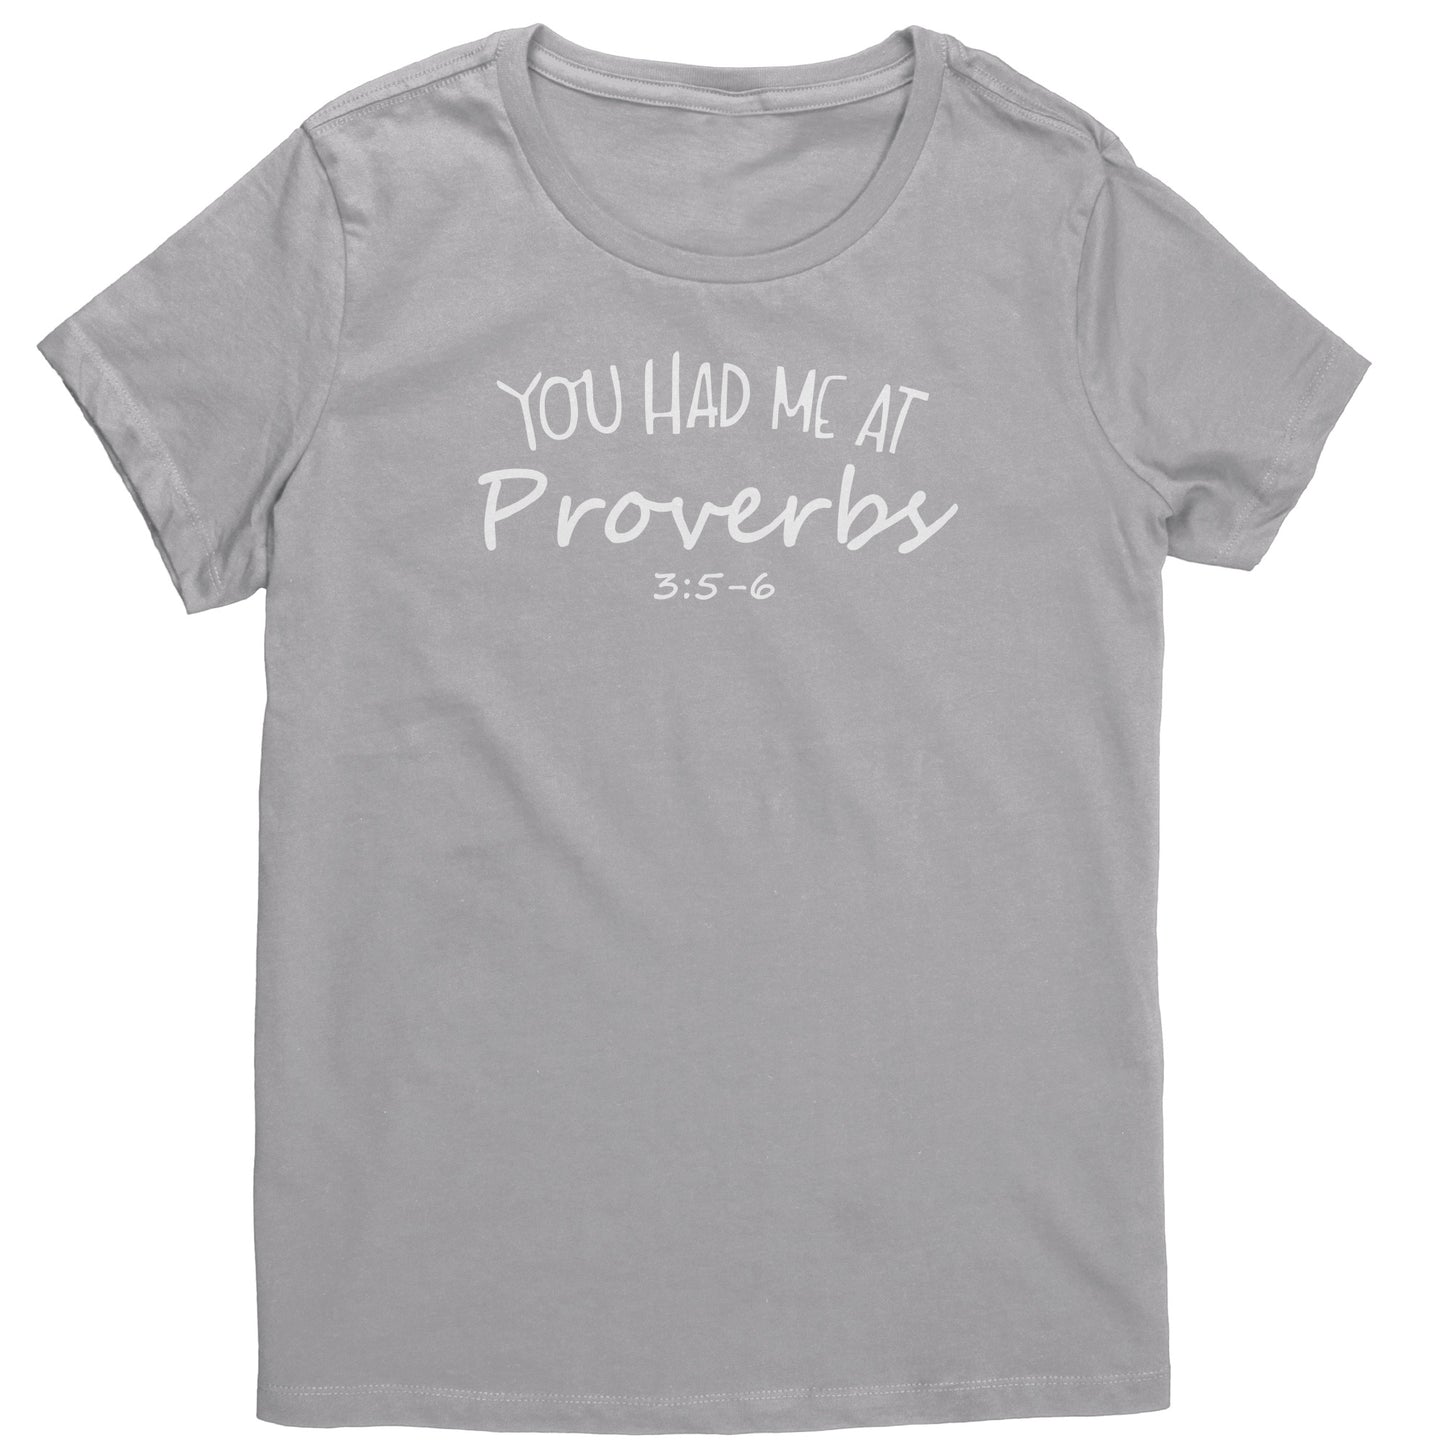 You Had Me At Proverbs 3:5-6 Women's T-Shirt Part 2